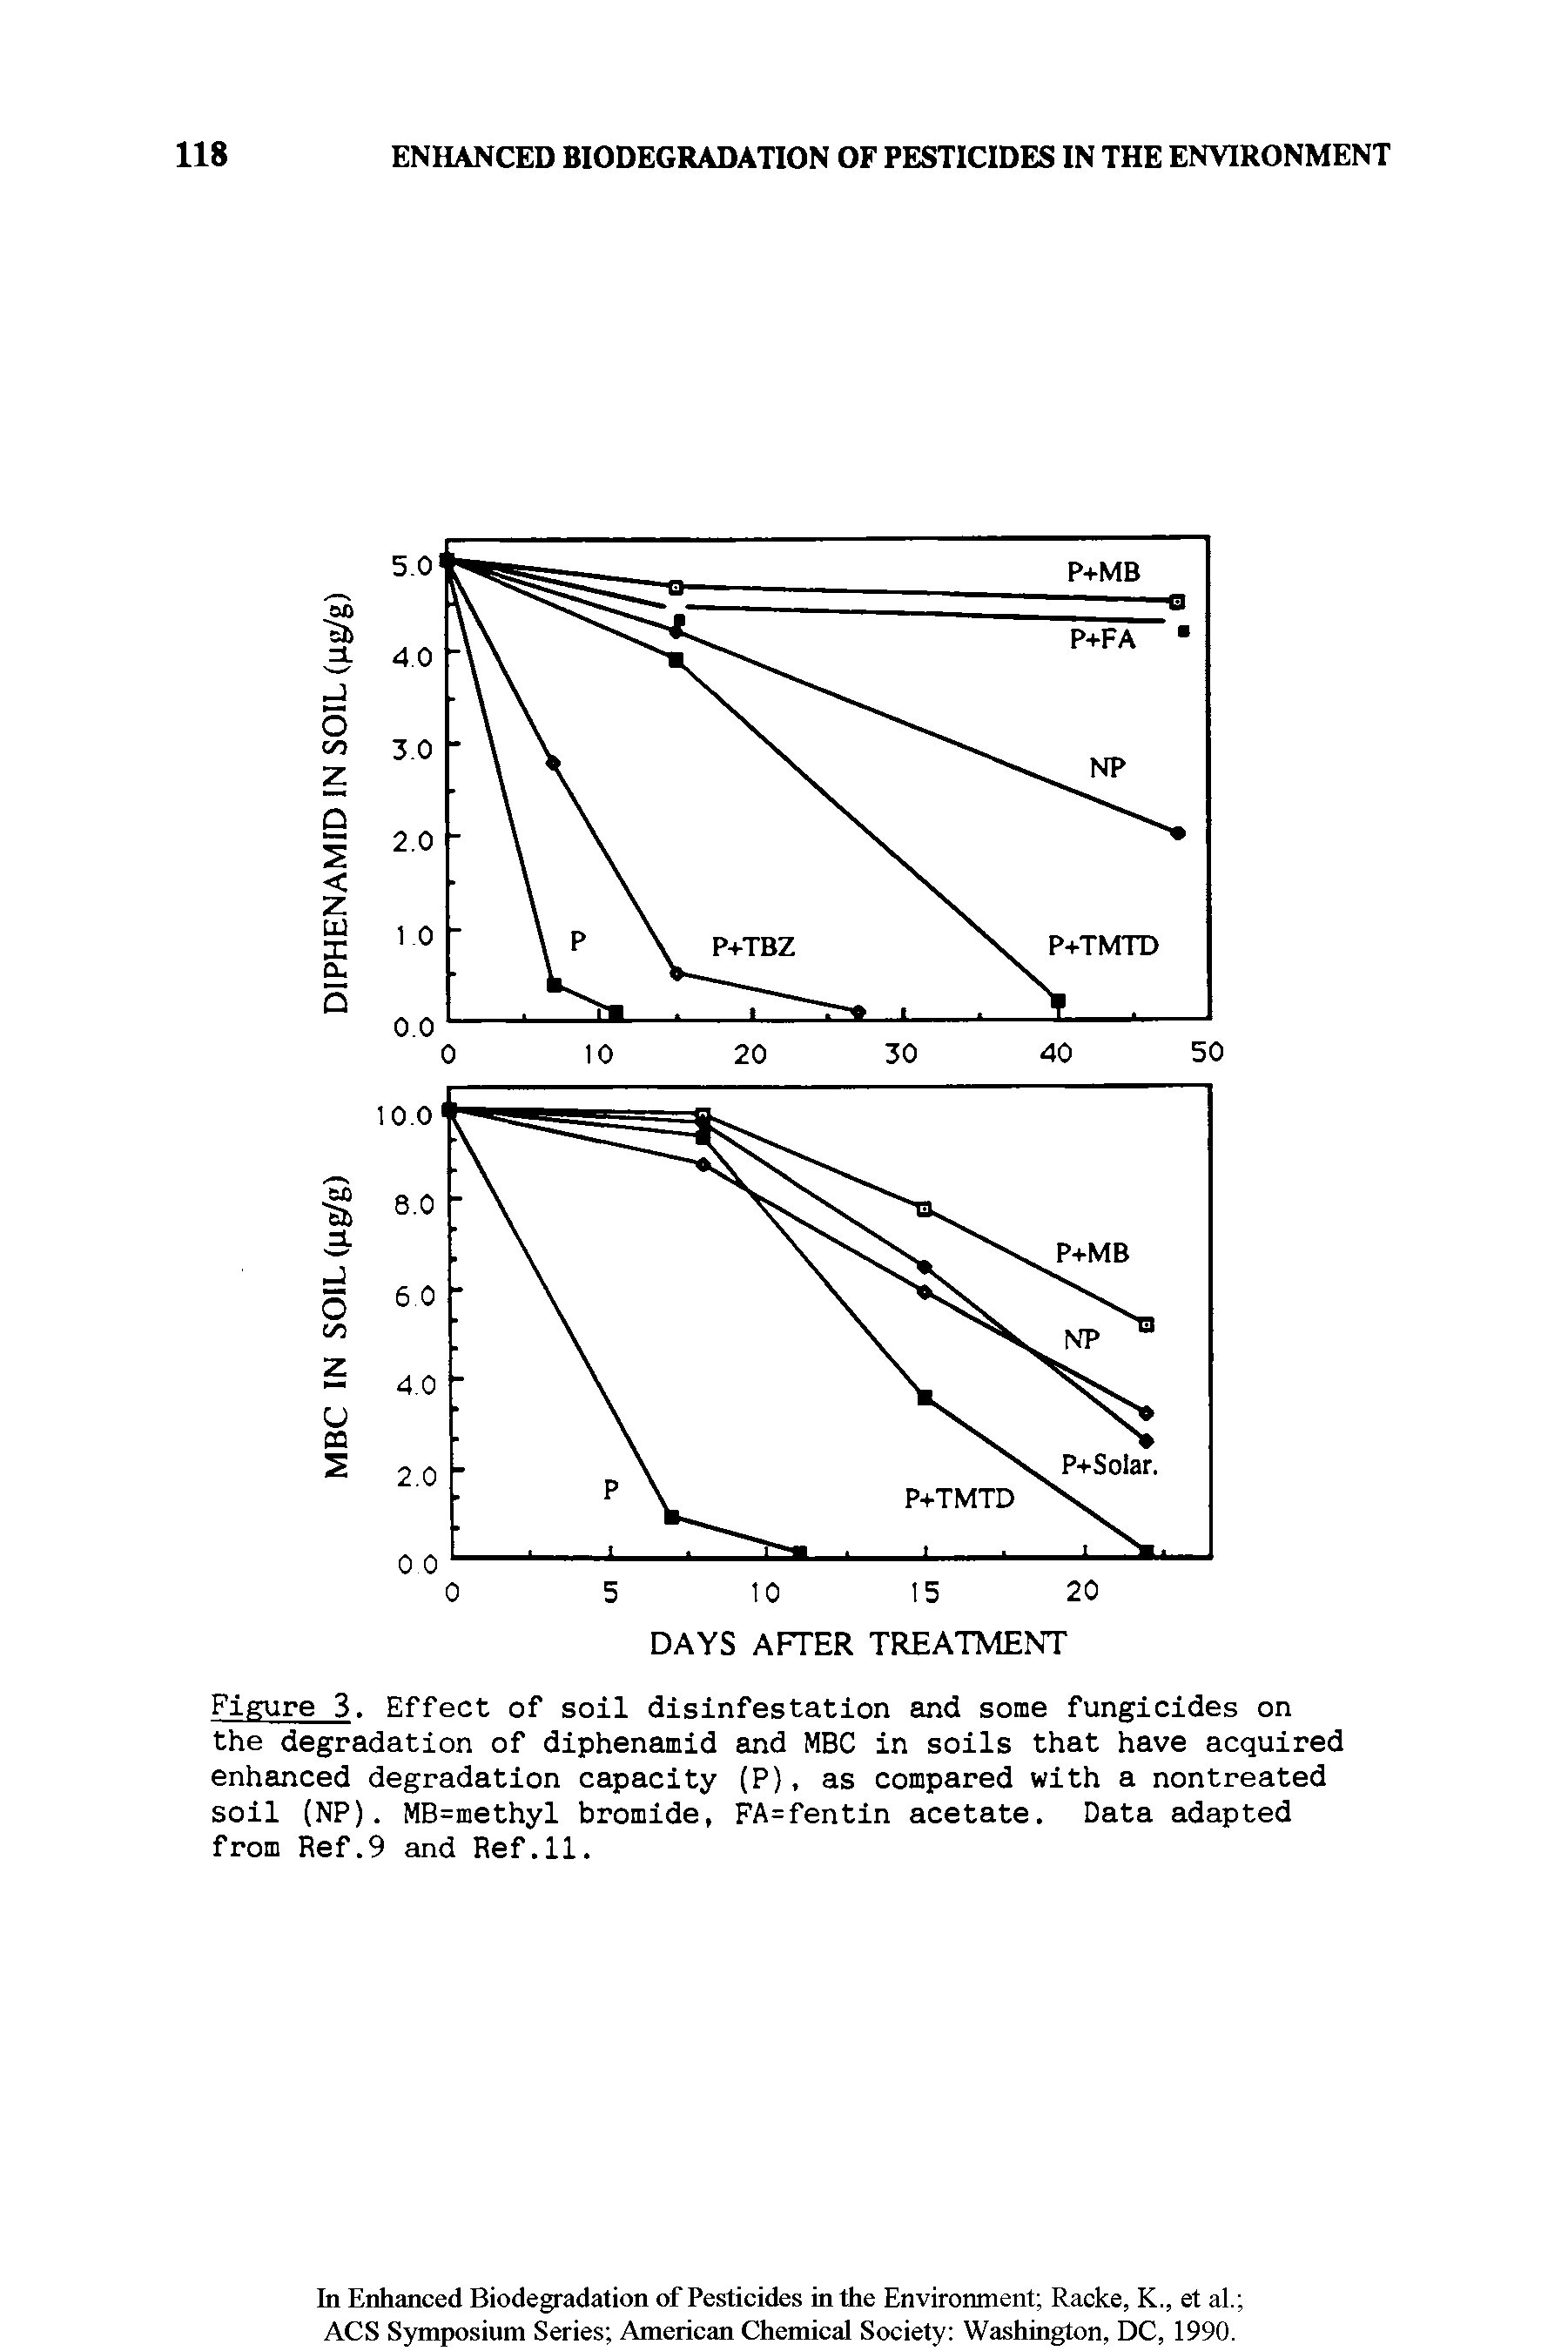 Figure 3. Effect of soil disinfestation and some fungicides on the degradation of diphenamid and MBC in soils that have acquired enhanced degradation capacity (P), as compared with a nontreated soil (NP). MB=methyl bromide, FA=fentin acetate. Data adapted from Ref.9 and Ref.11.